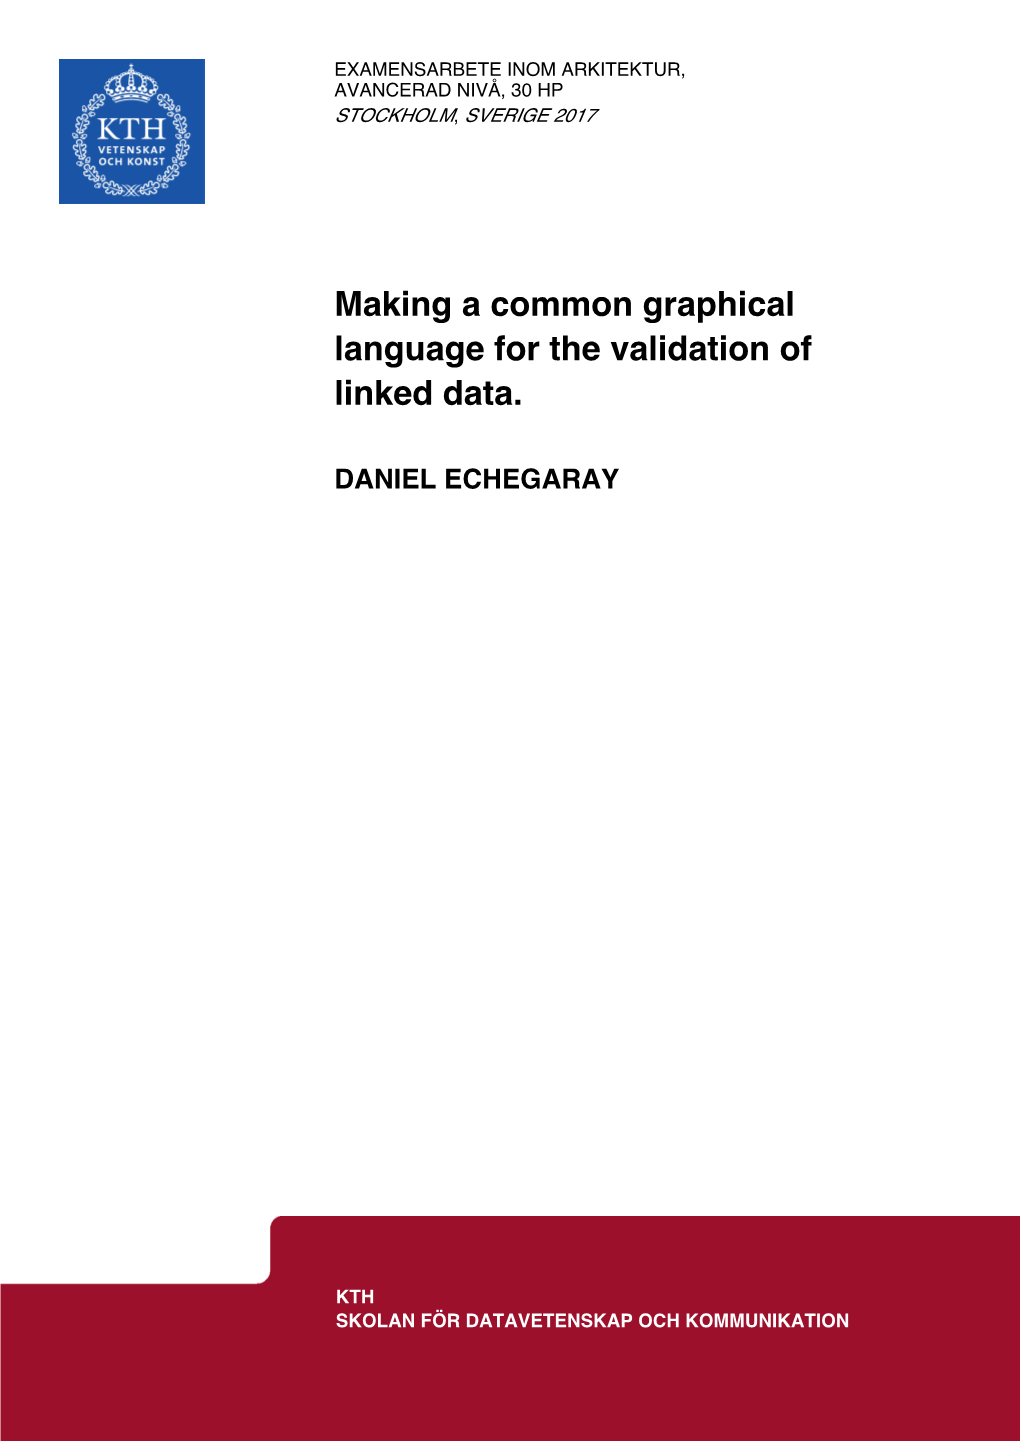 Making a Common Graphical Language for the Validation of Linked Data